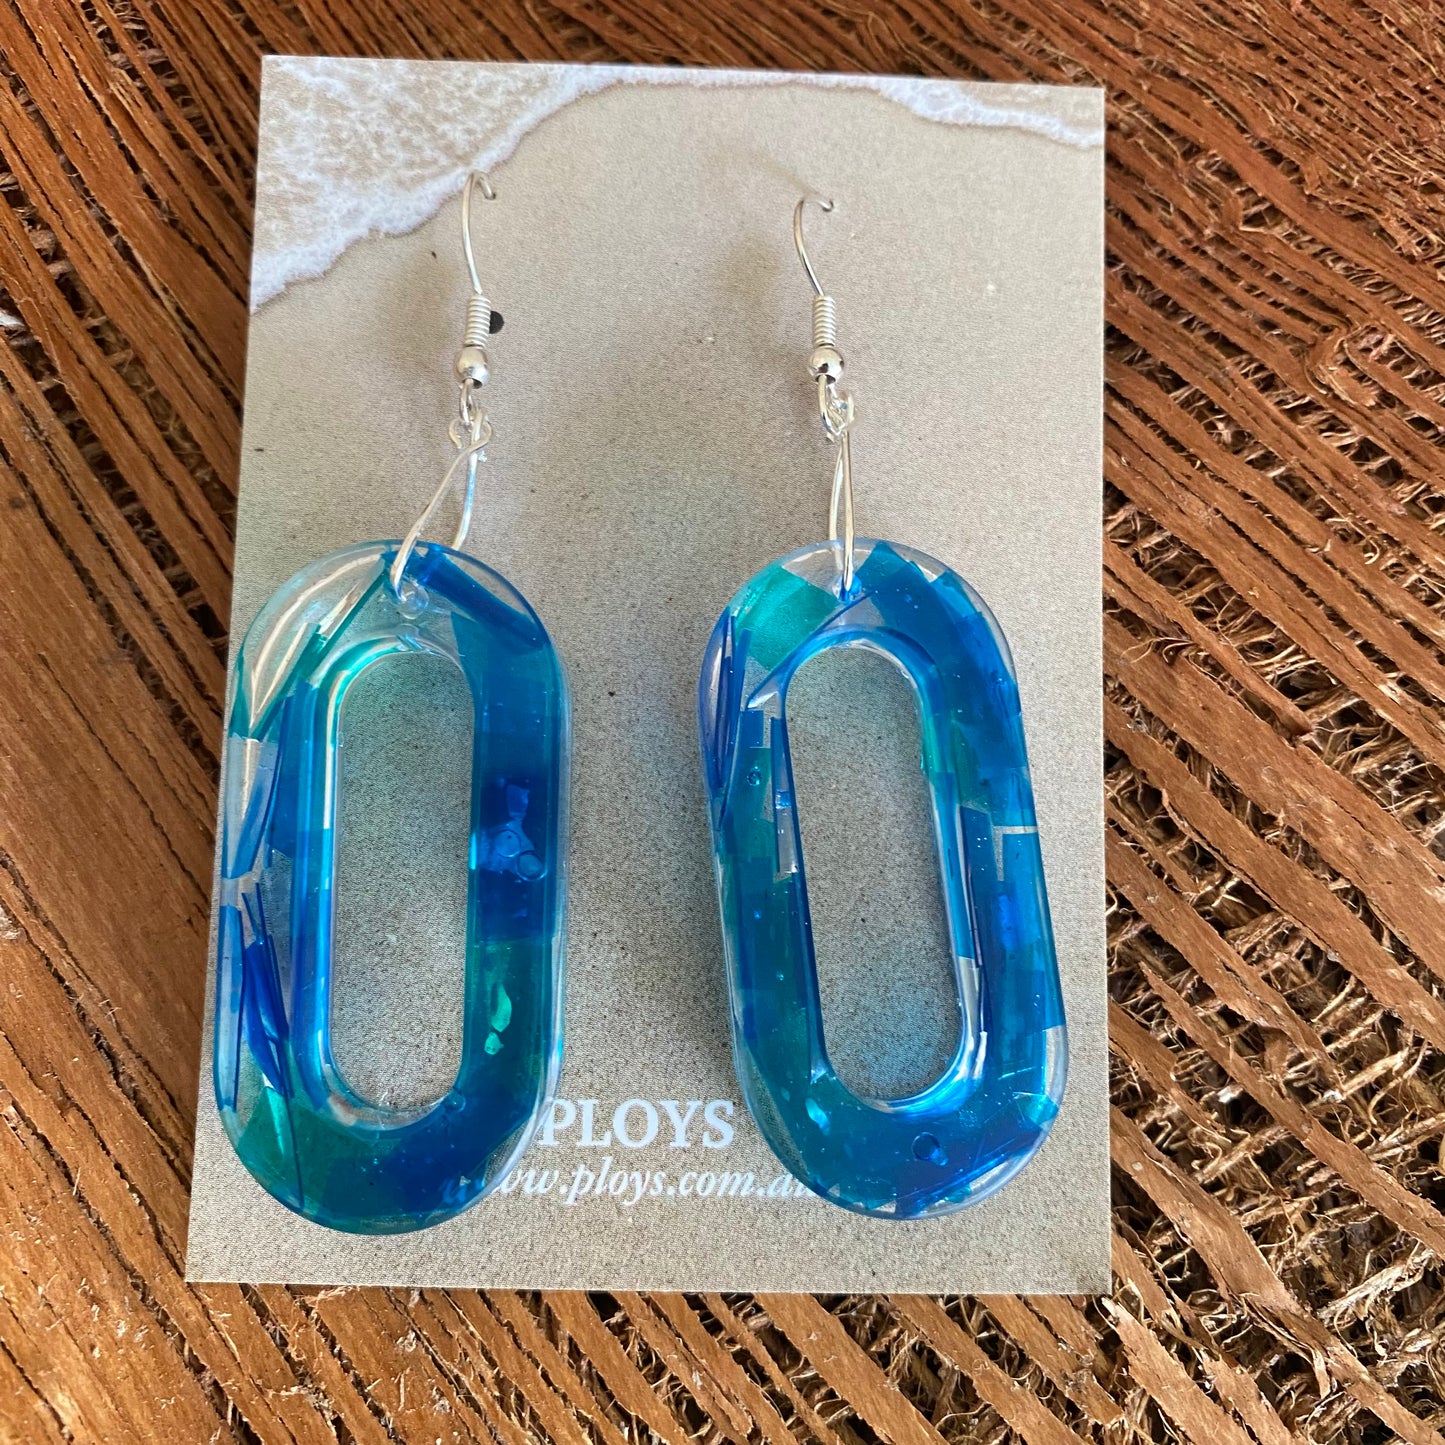 Earrings from Beach Microplastics and Plastic Waste - variety of colours